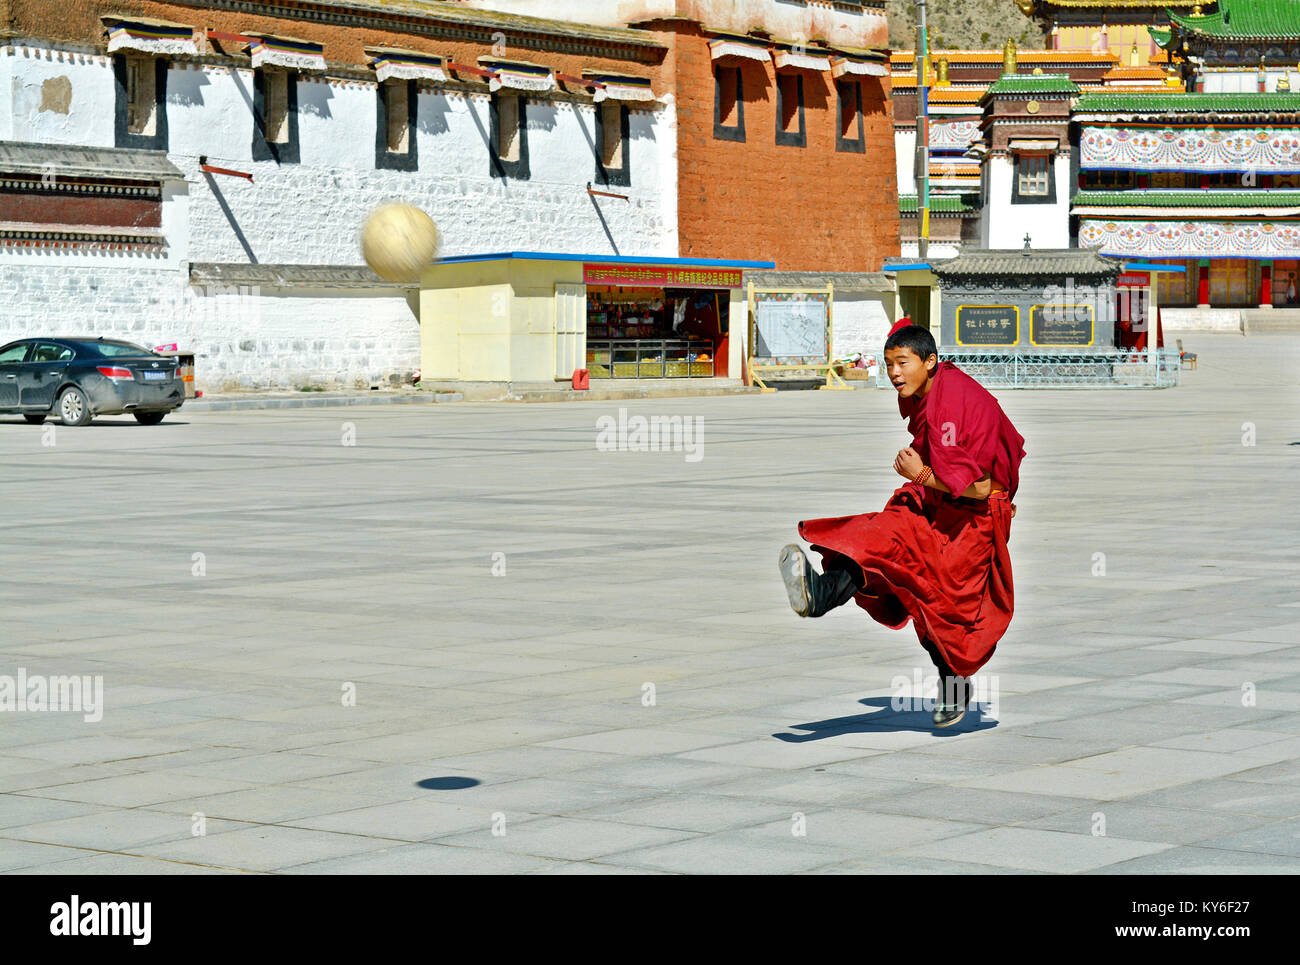 A Tibetan monk playing football in the courtyard of Labrang monastery in Xiahe, Gansu Province, China Stock Photo